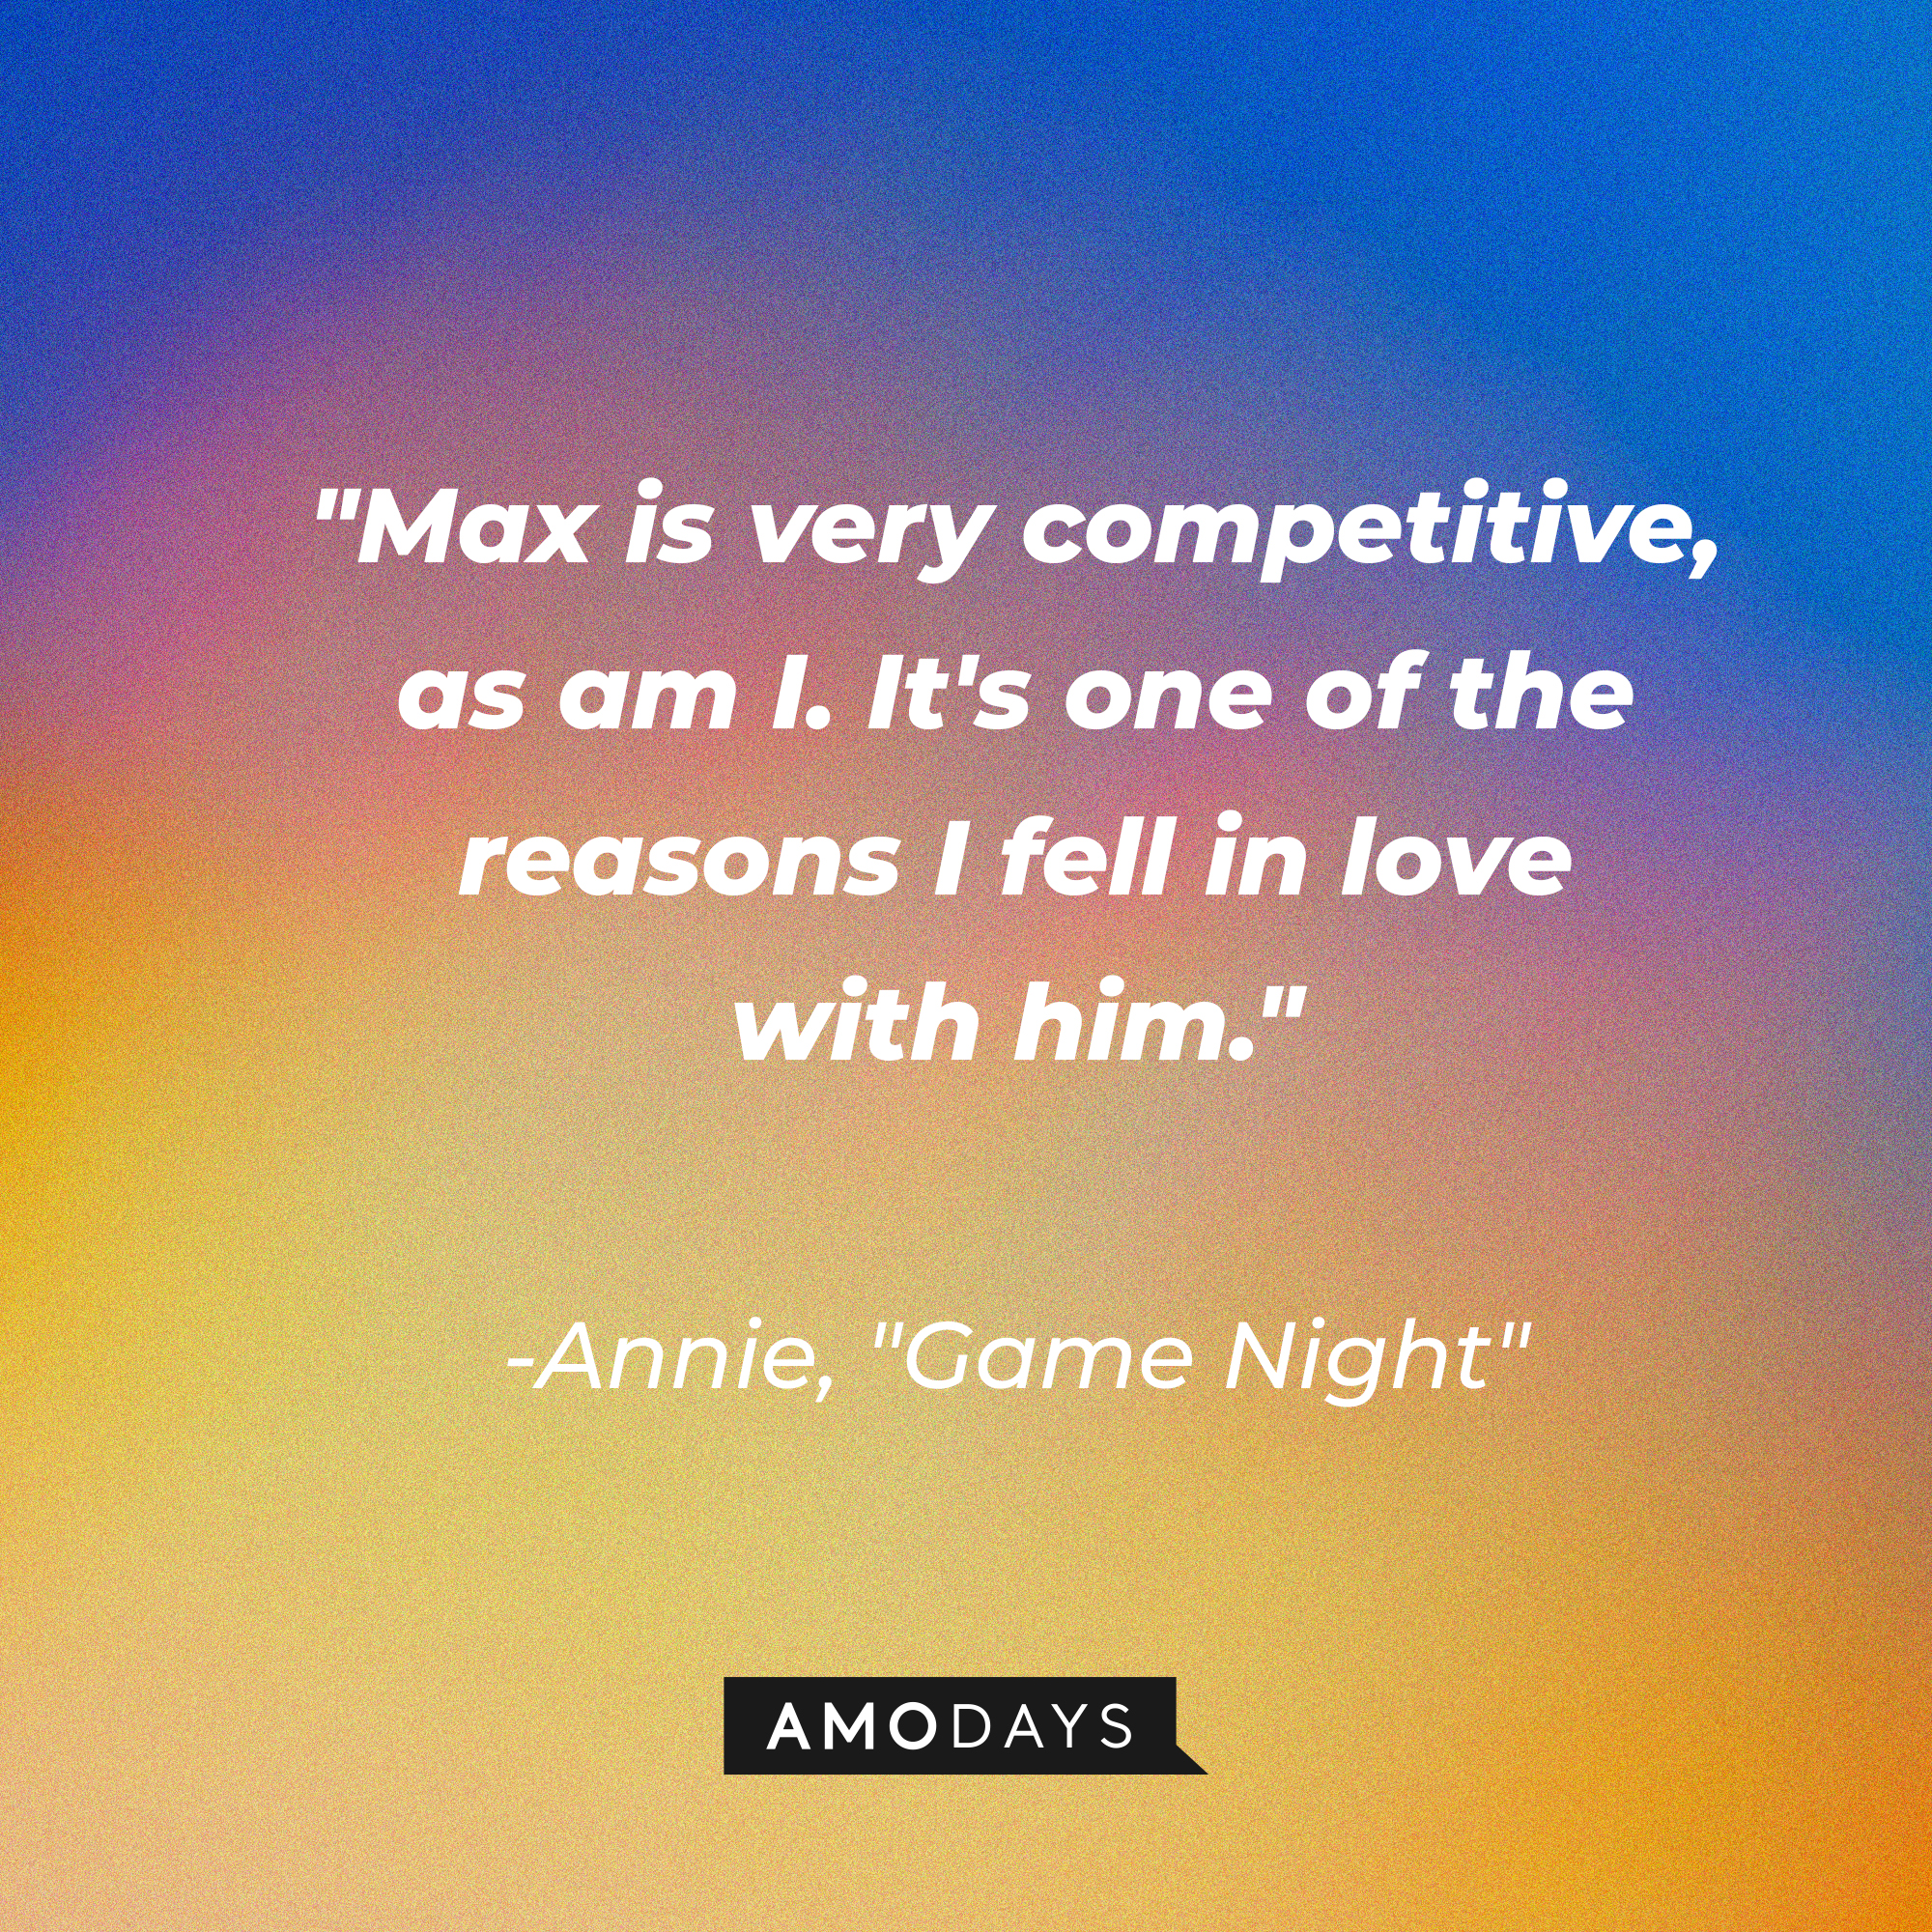 Annie's quote from “Game Night”: “Max is very competitive, as am I. It's one of the reasons I fell in love with him.” | Source: AmoDays